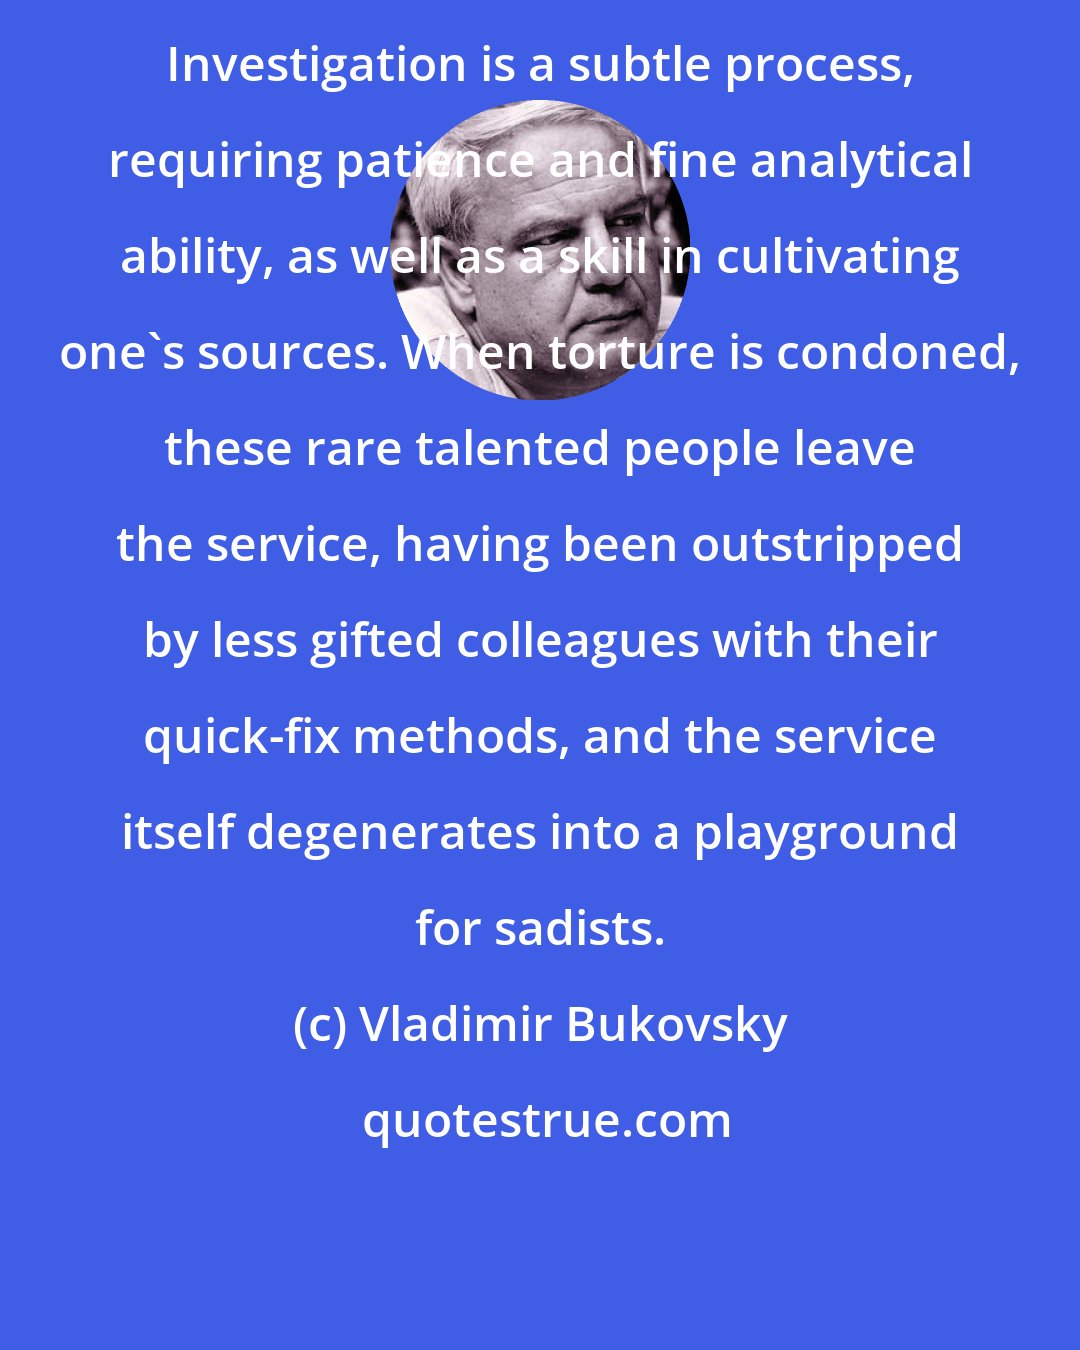 Vladimir Bukovsky: Investigation is a subtle process, requiring patience and fine analytical ability, as well as a skill in cultivating one's sources. When torture is condoned, these rare talented people leave the service, having been outstripped by less gifted colleagues with their quick-fix methods, and the service itself degenerates into a playground for sadists.